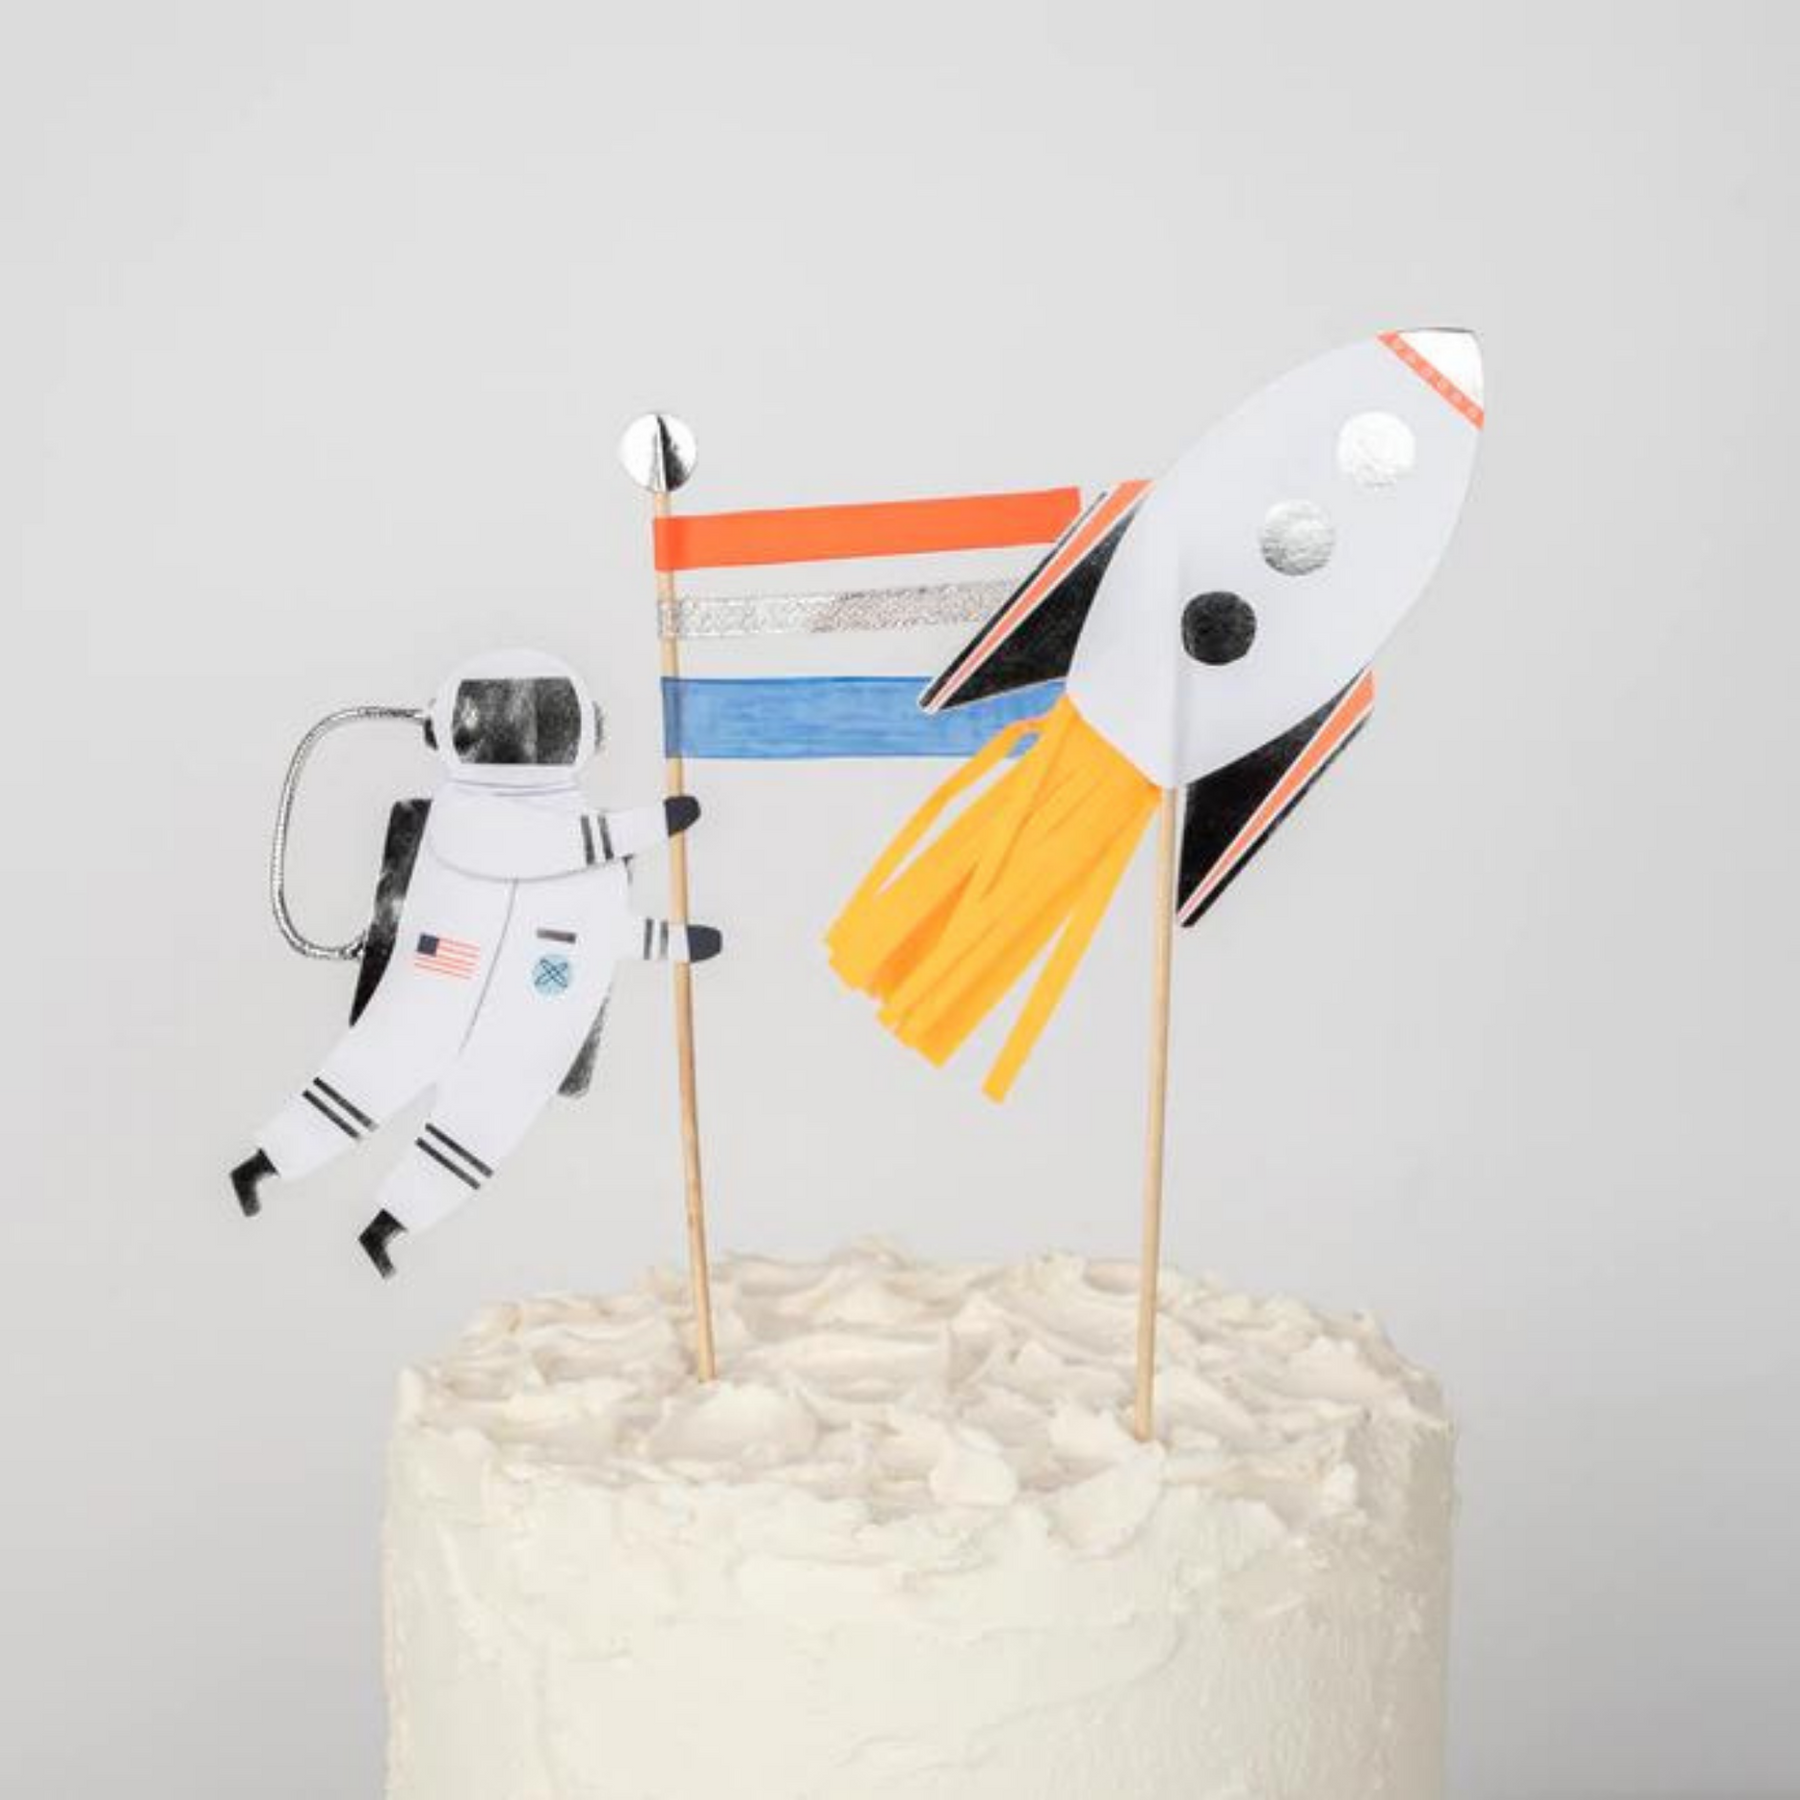 Space Cake Topper